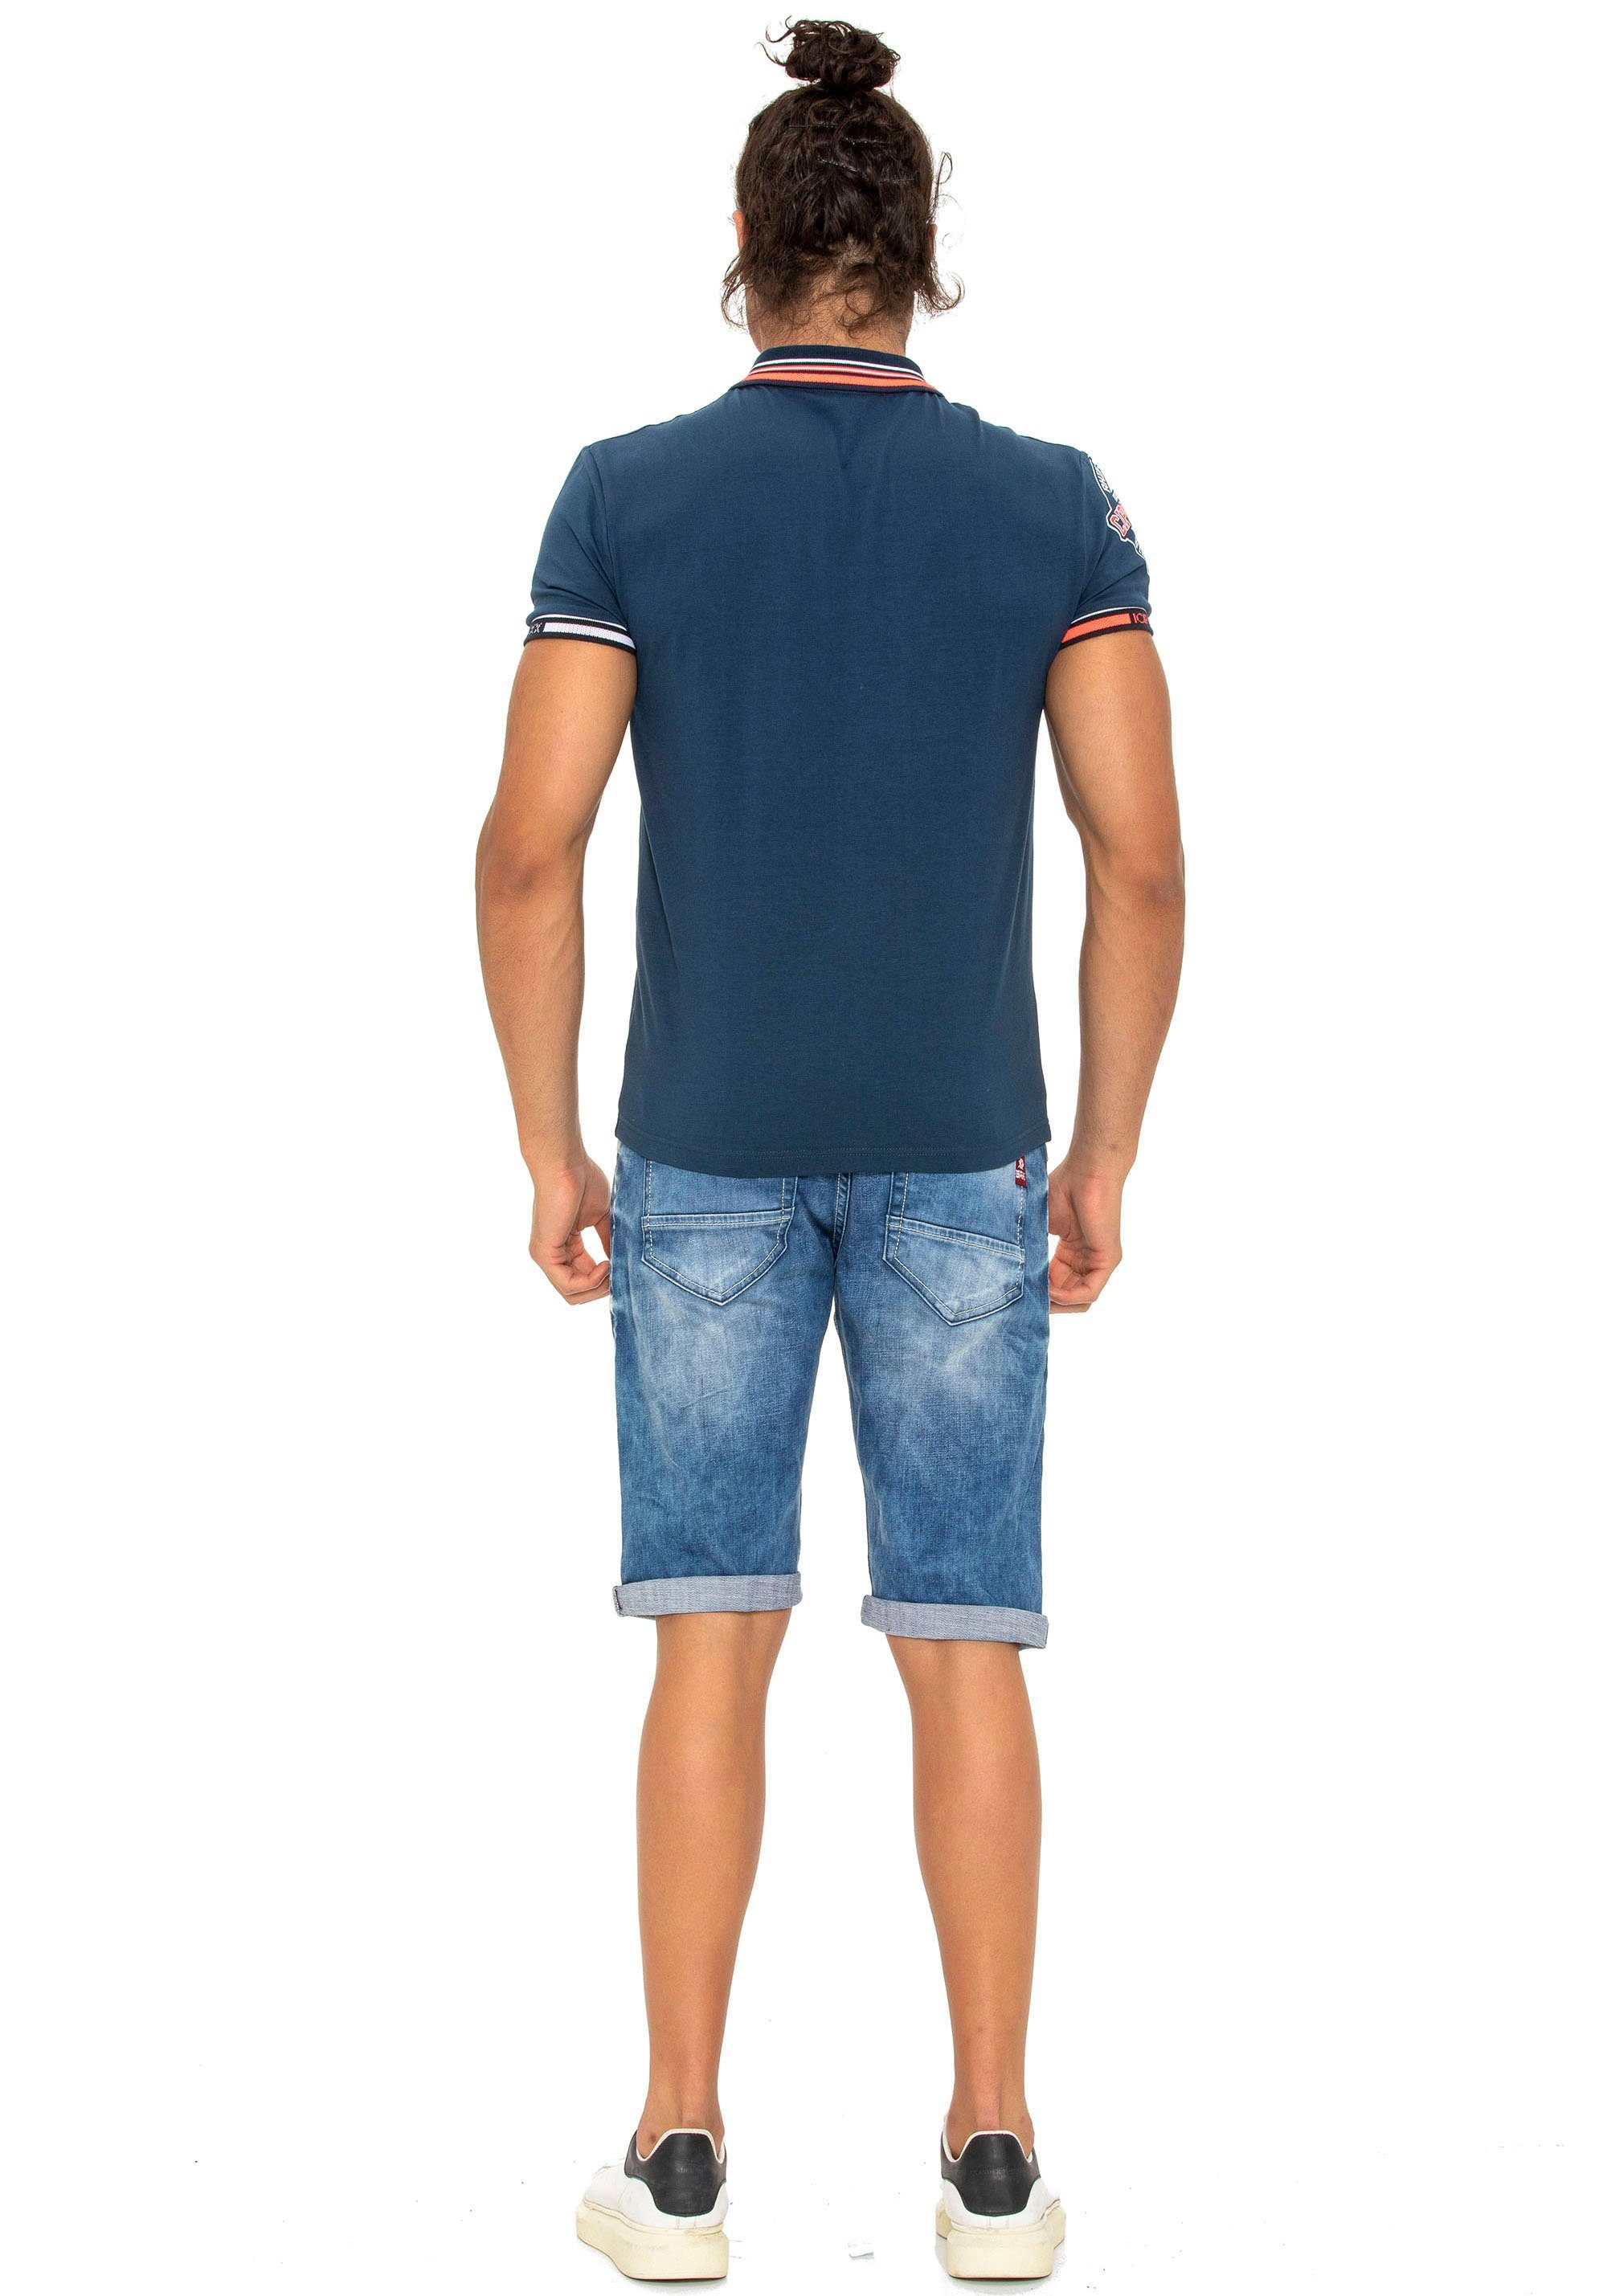 Cipo & Jeansshorts Baxx blue used